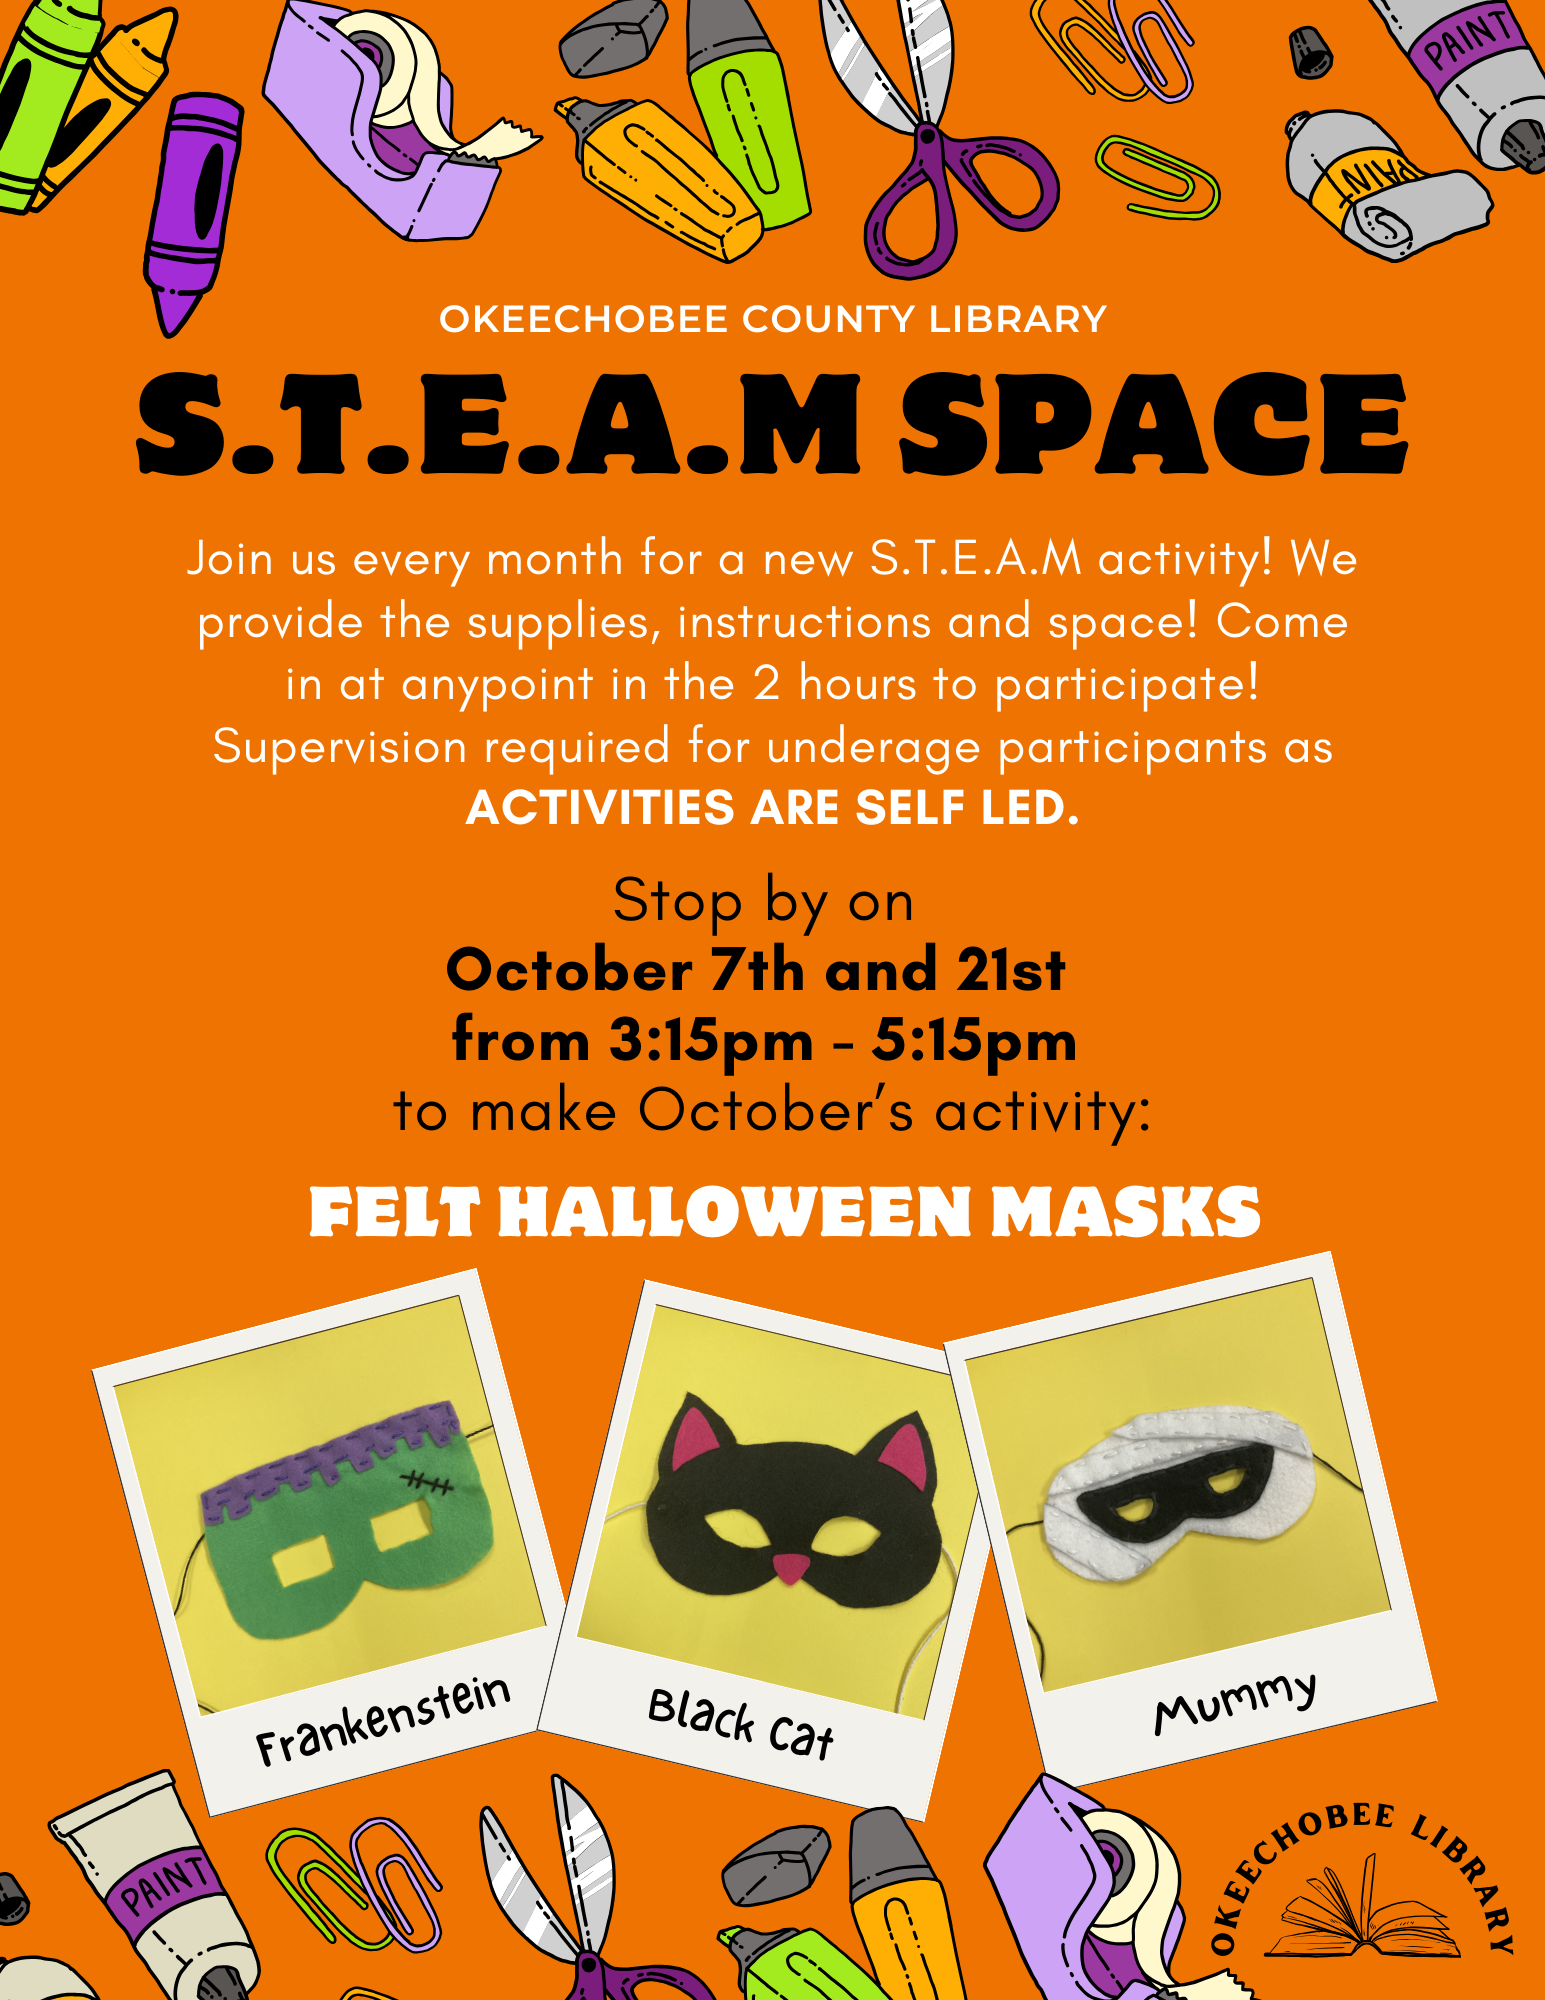 Looking for an fun activity to try out where the supplies, instructions and space are provided for FREE?! Beginning this October join us in our S.T.E.A.M. Space every month for a new S.T.E.A.M activity! Come in at anypoint in the 2 hours to participate! Supervision required for underage participants as ACTIVITIES ARE SELF LED